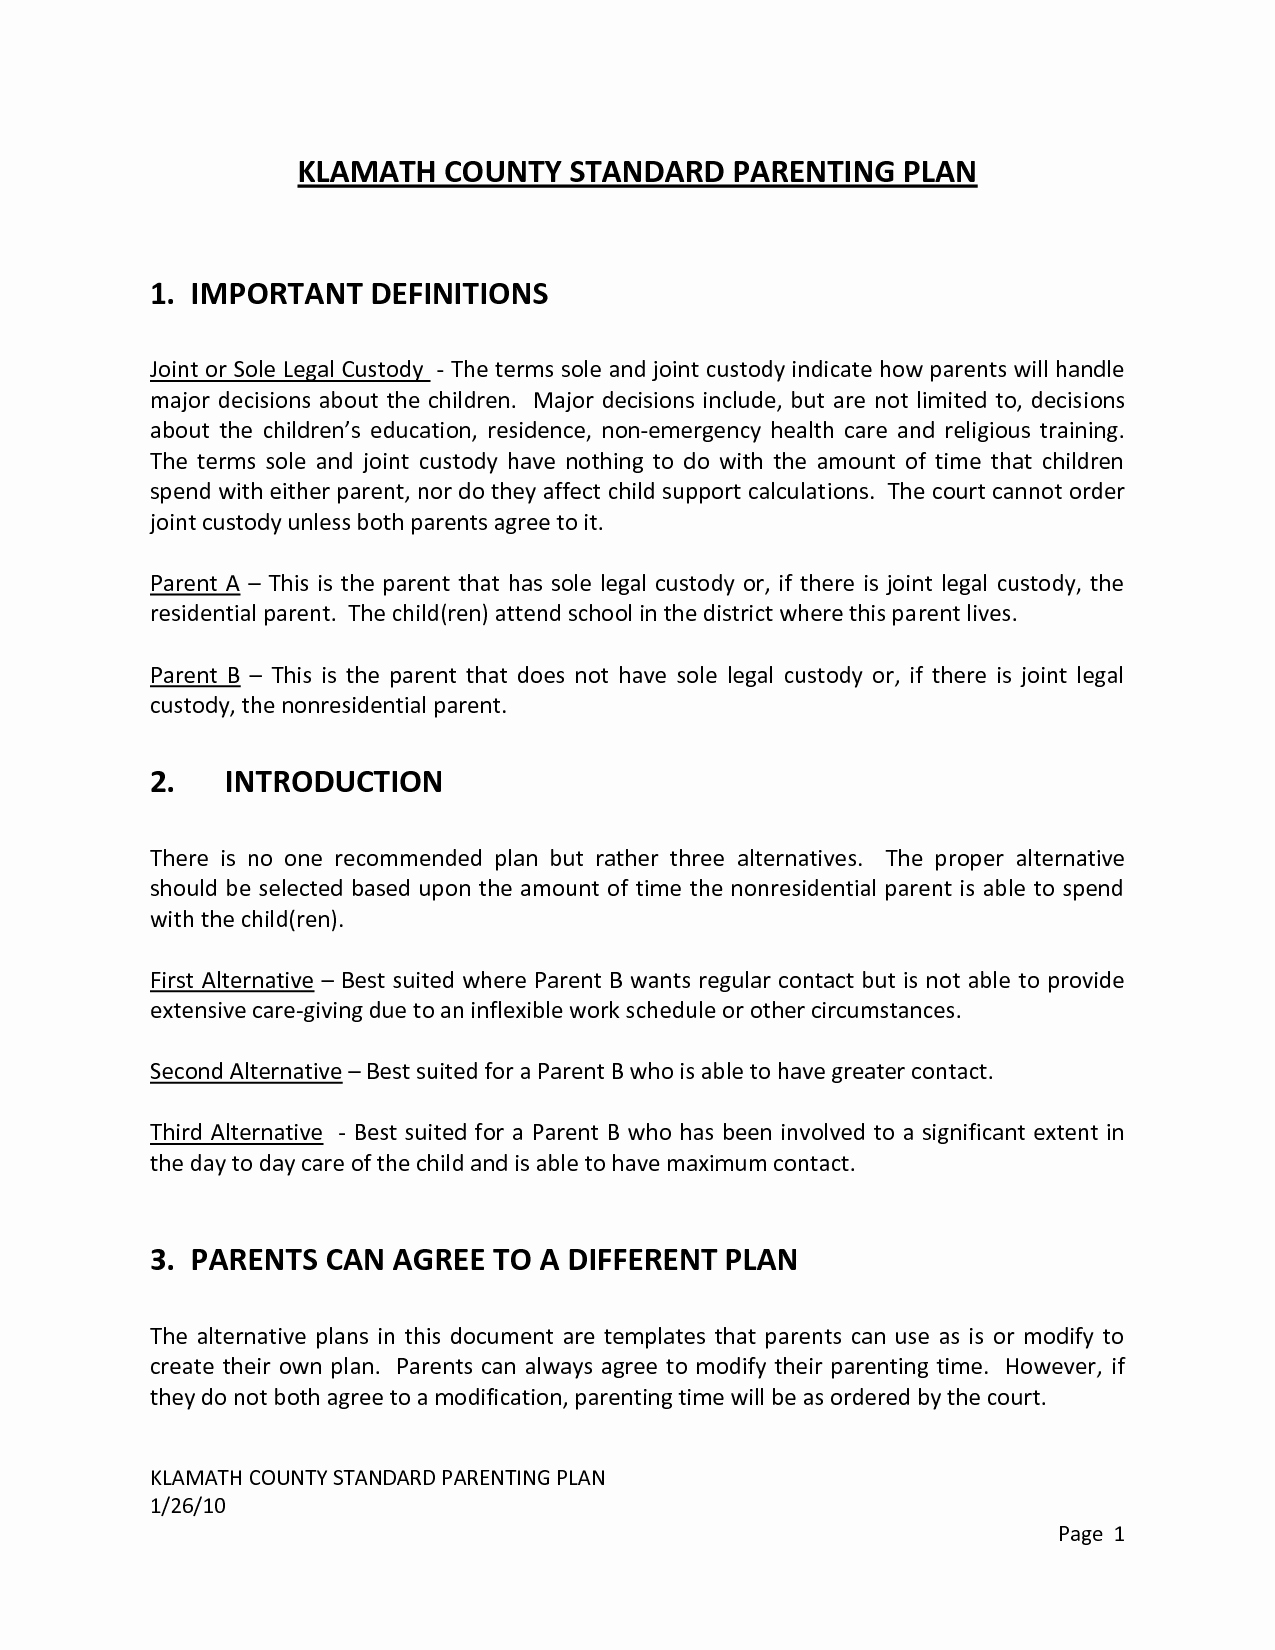 Parenting Plan California Template Awesome Template Parenting Plan Template Image Parenting Plan